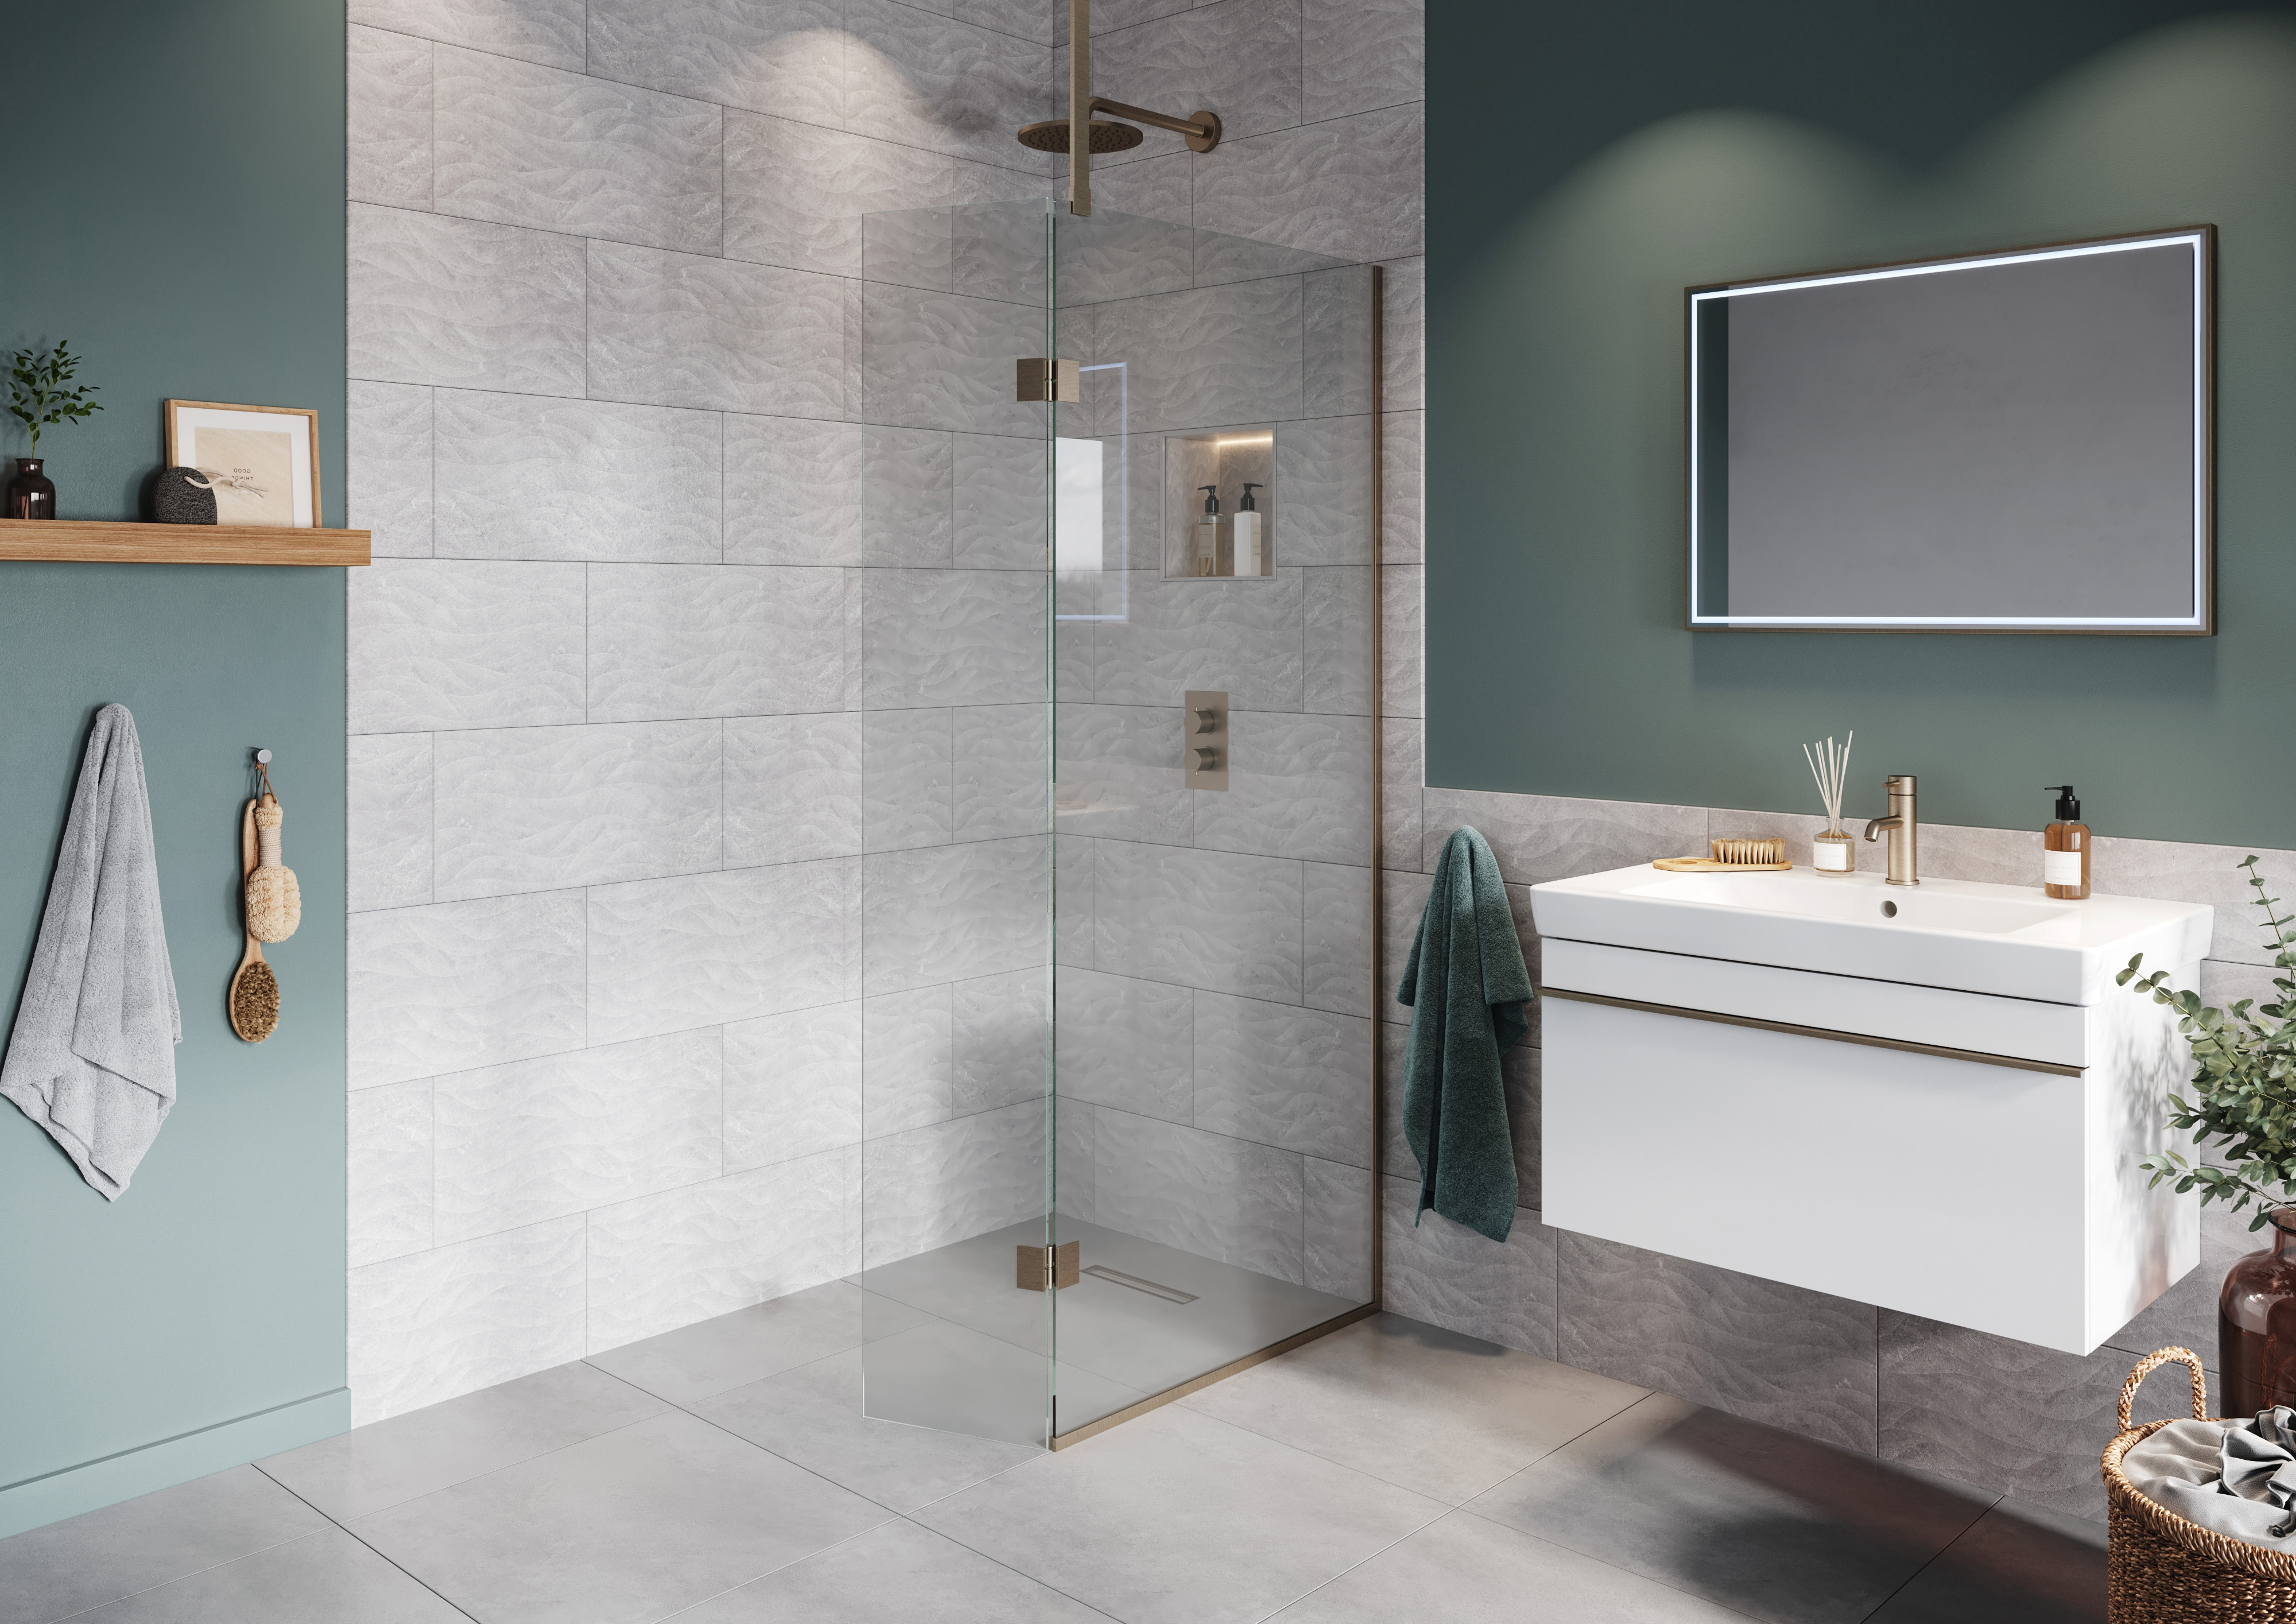 Hadleigh 8mm Brushed Nickel 900mm Frameless Wetroom Screen with Ceiling Arm & 350mm Pivot Panel